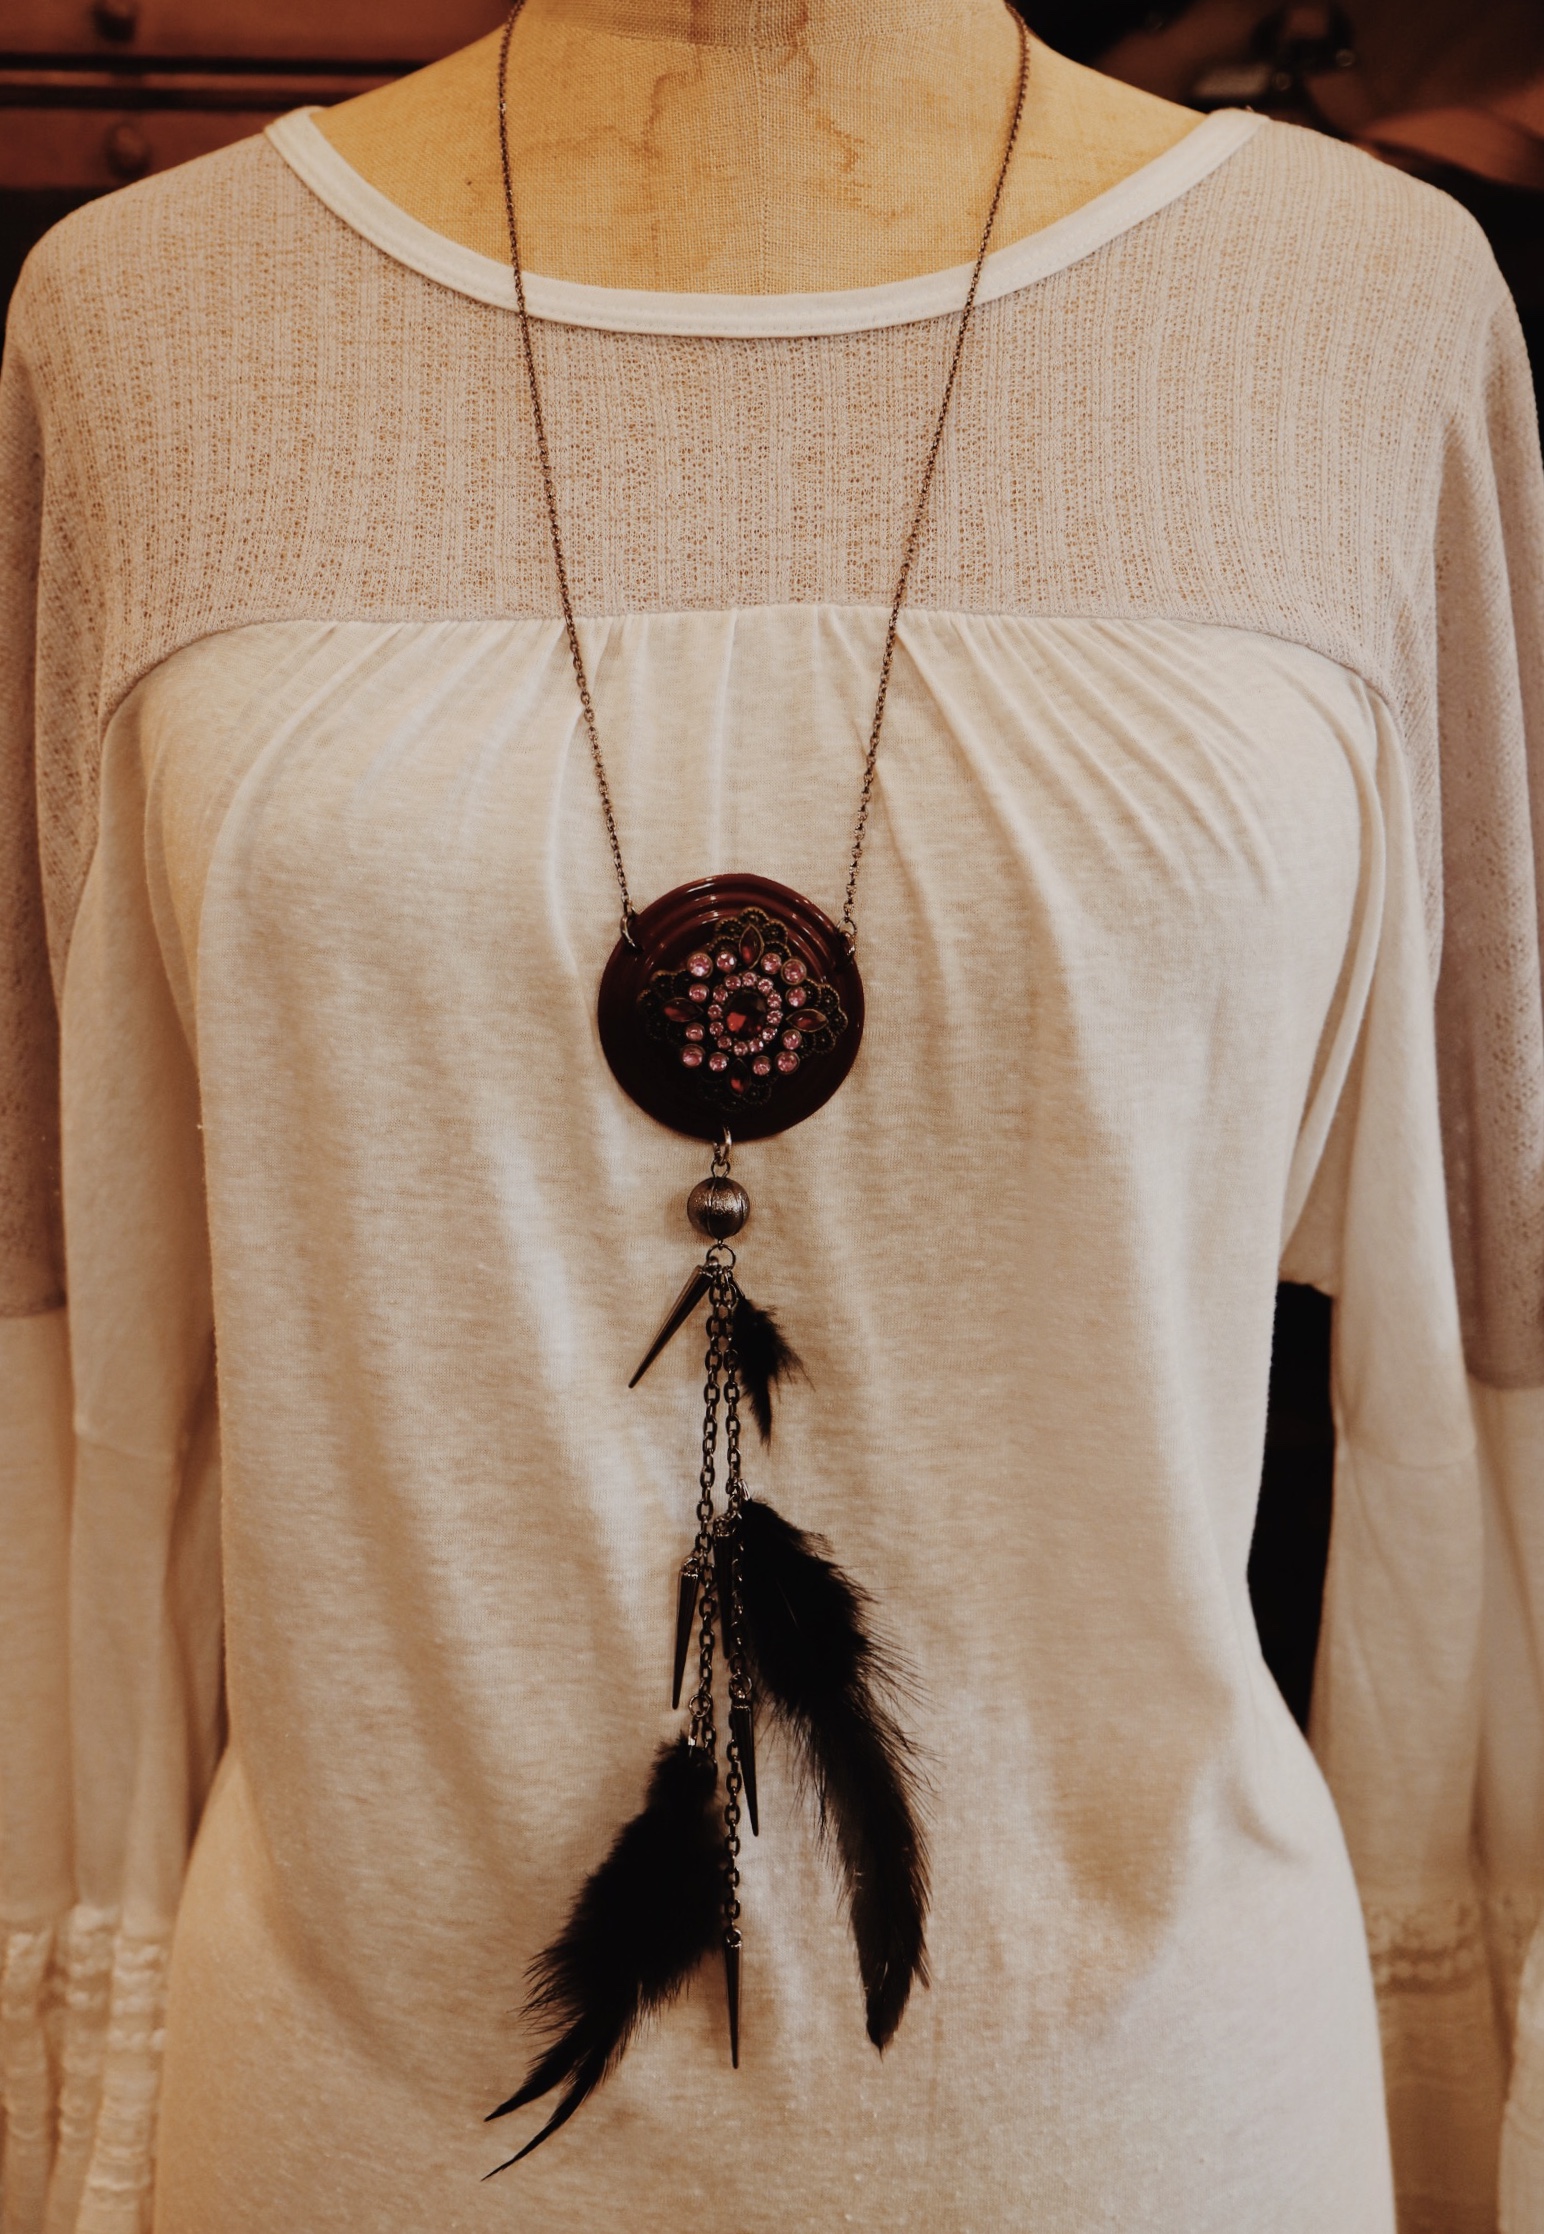 This handmade necklace is on a 30 inch chain!